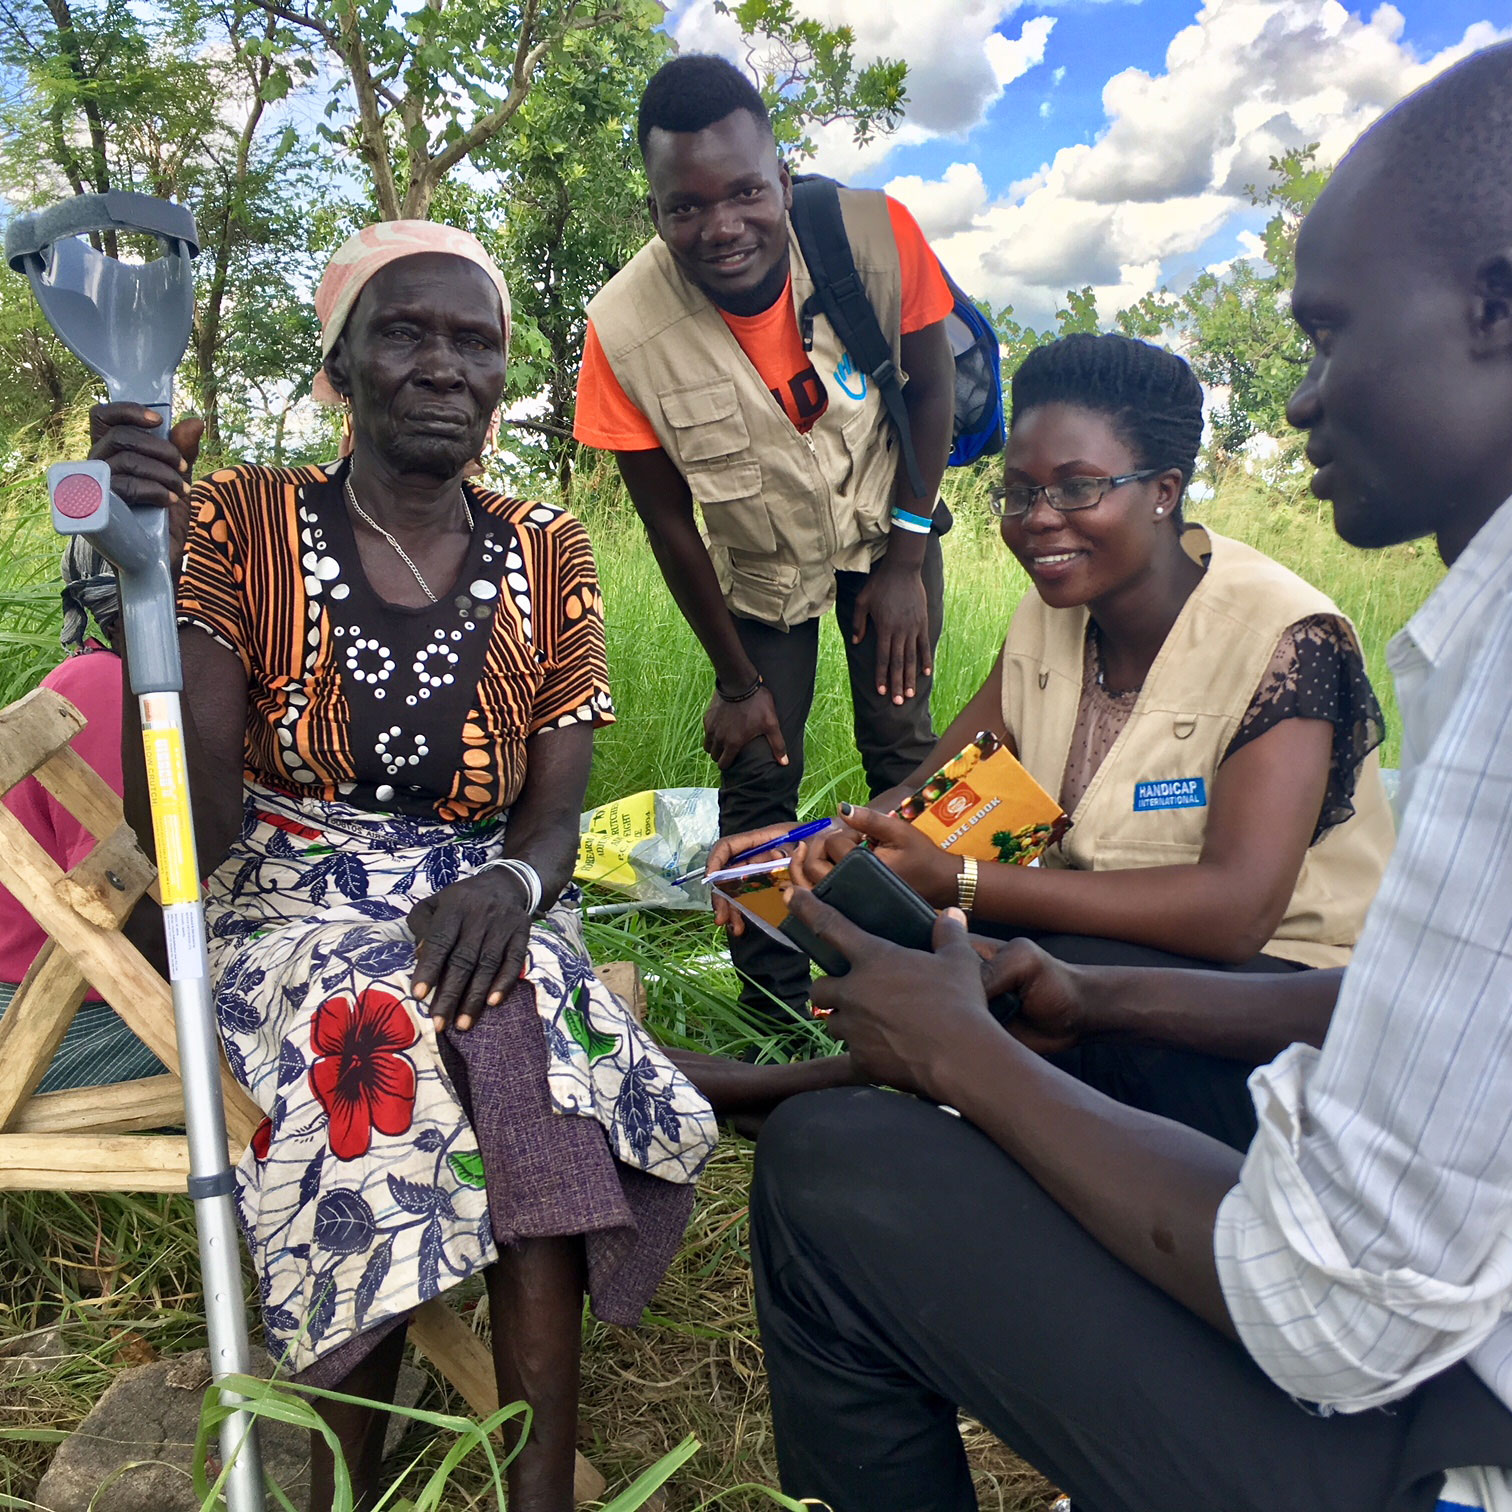 Uganda: Photo of an older woman sitting on a wooden chair. She holds a crutch in her hand. She has visual and physical impairments. A young man and a young woman from Handicap International sit next to her. Another young man looks in the direction of the older woman. He is not an employee of the organization.